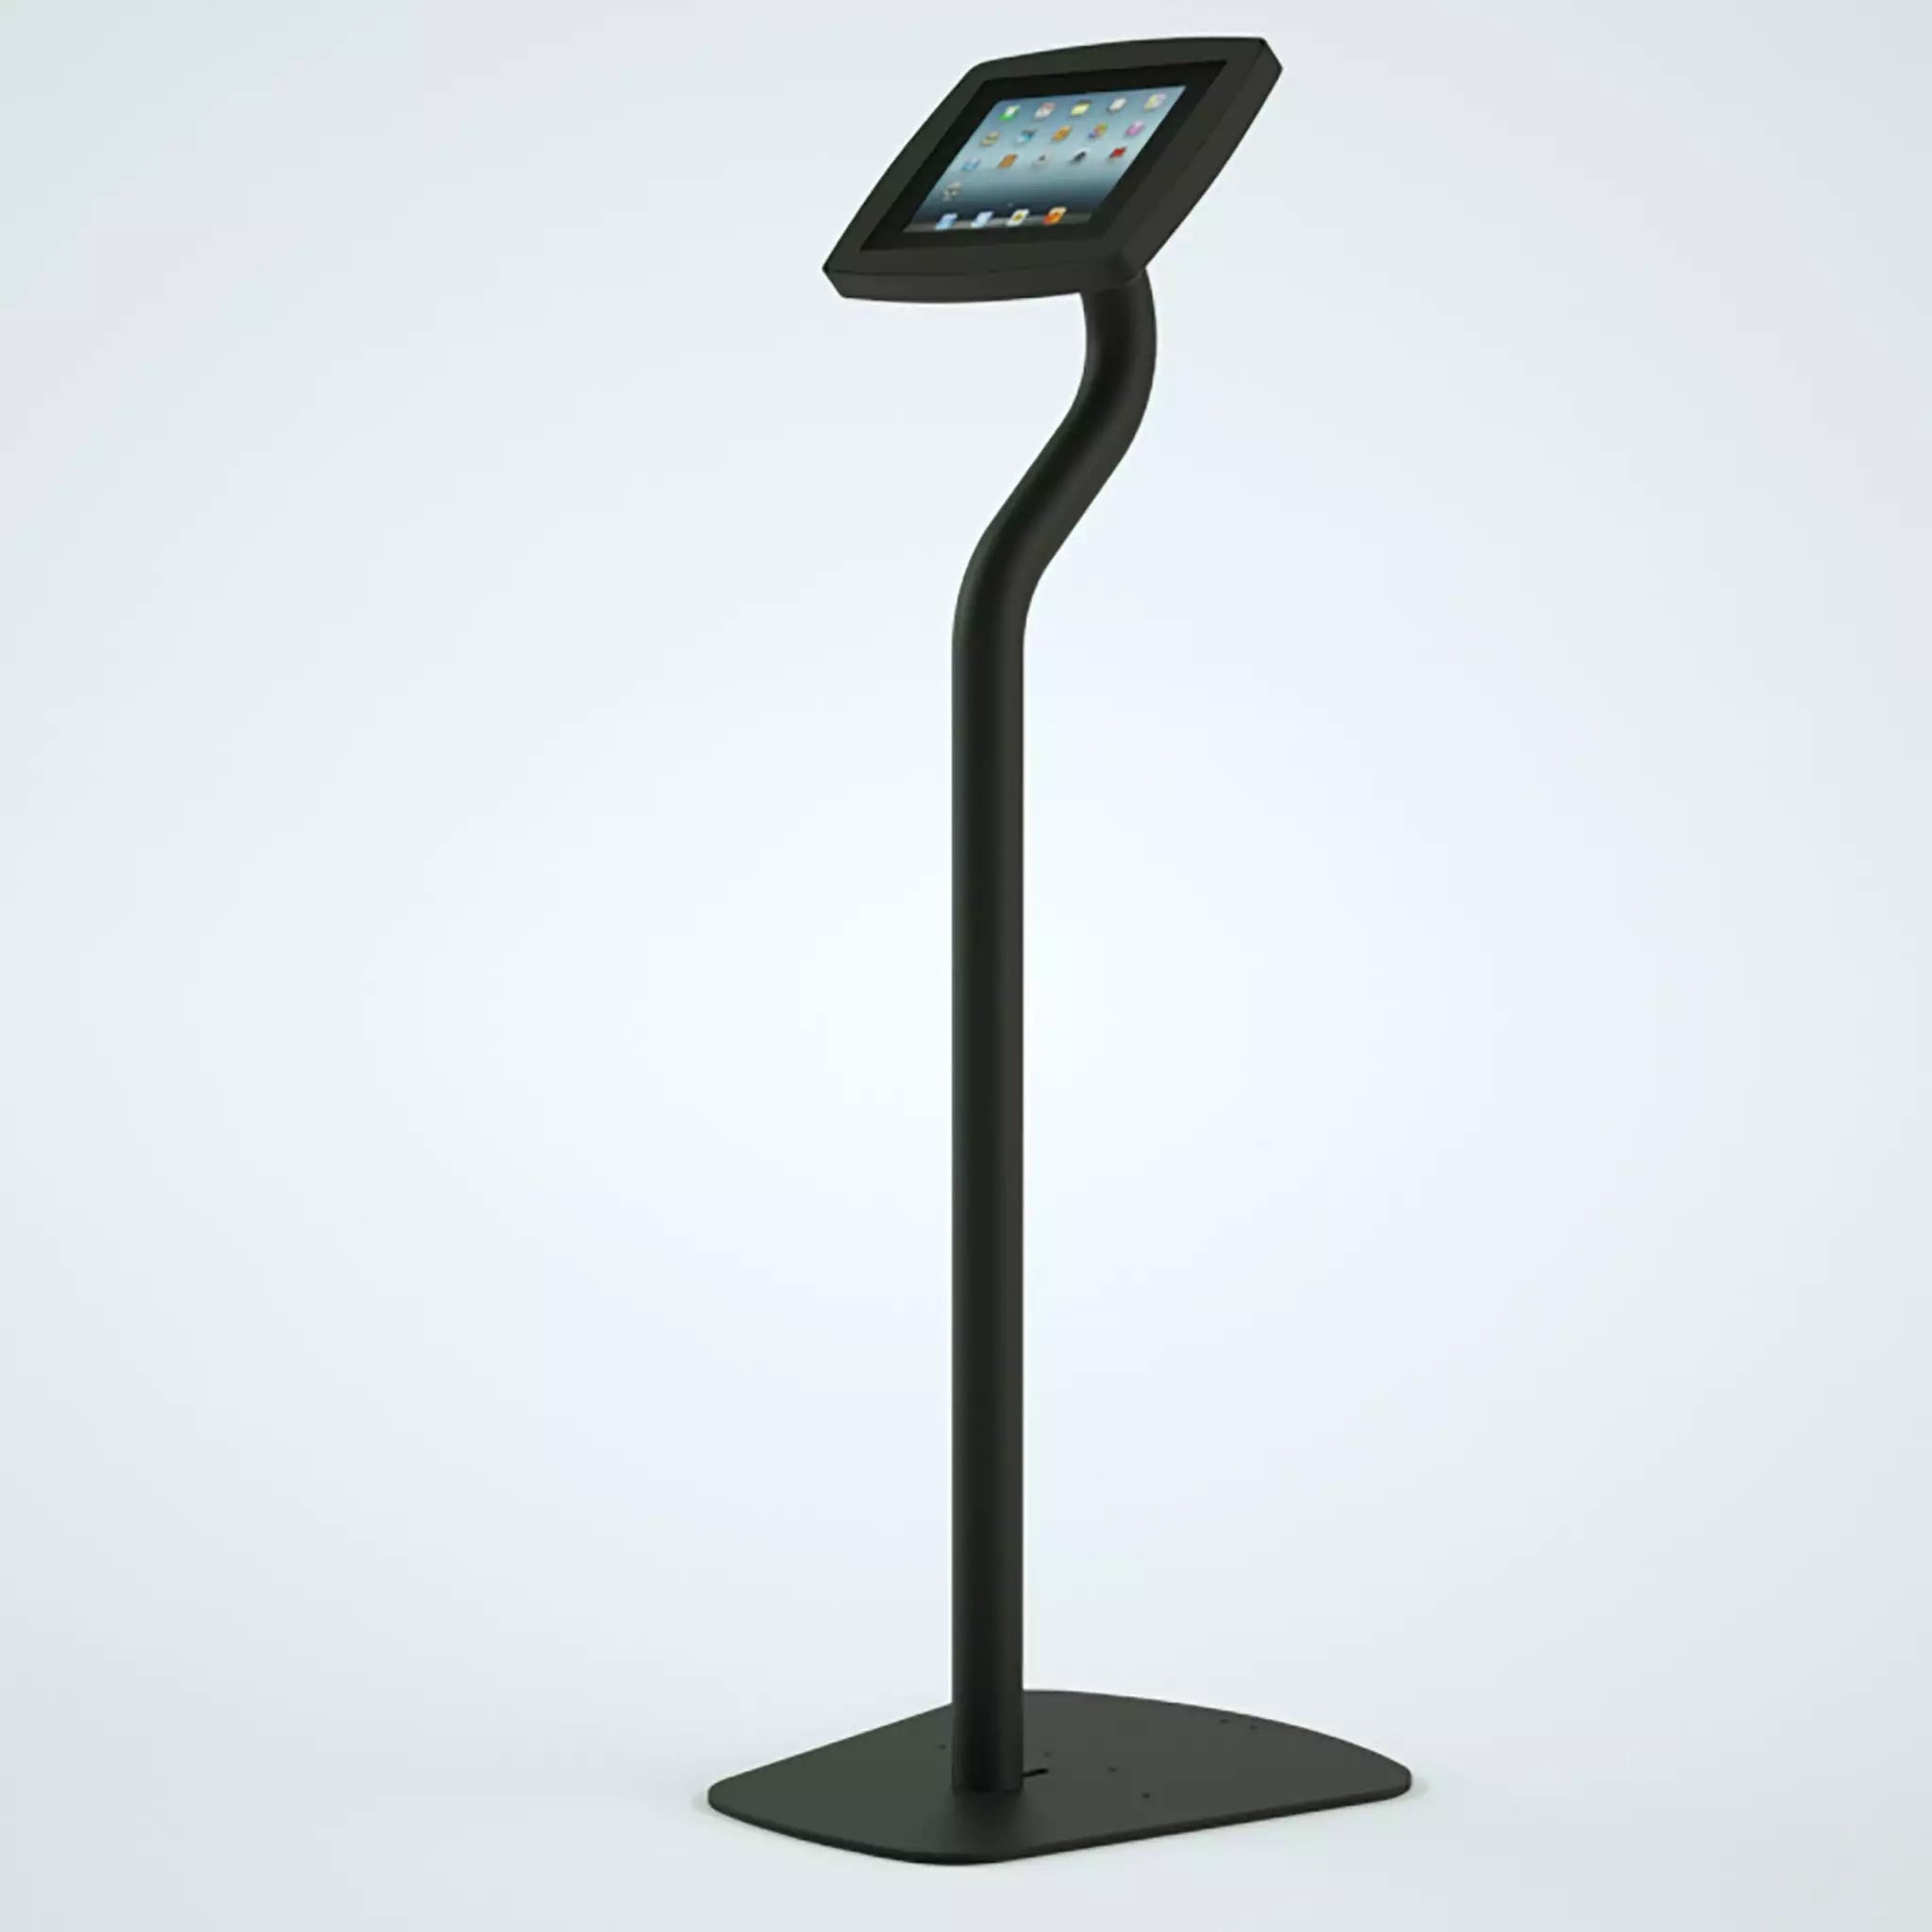 The Floor freestanding iPad and Tablet kiosk in black with a screen tablet display.